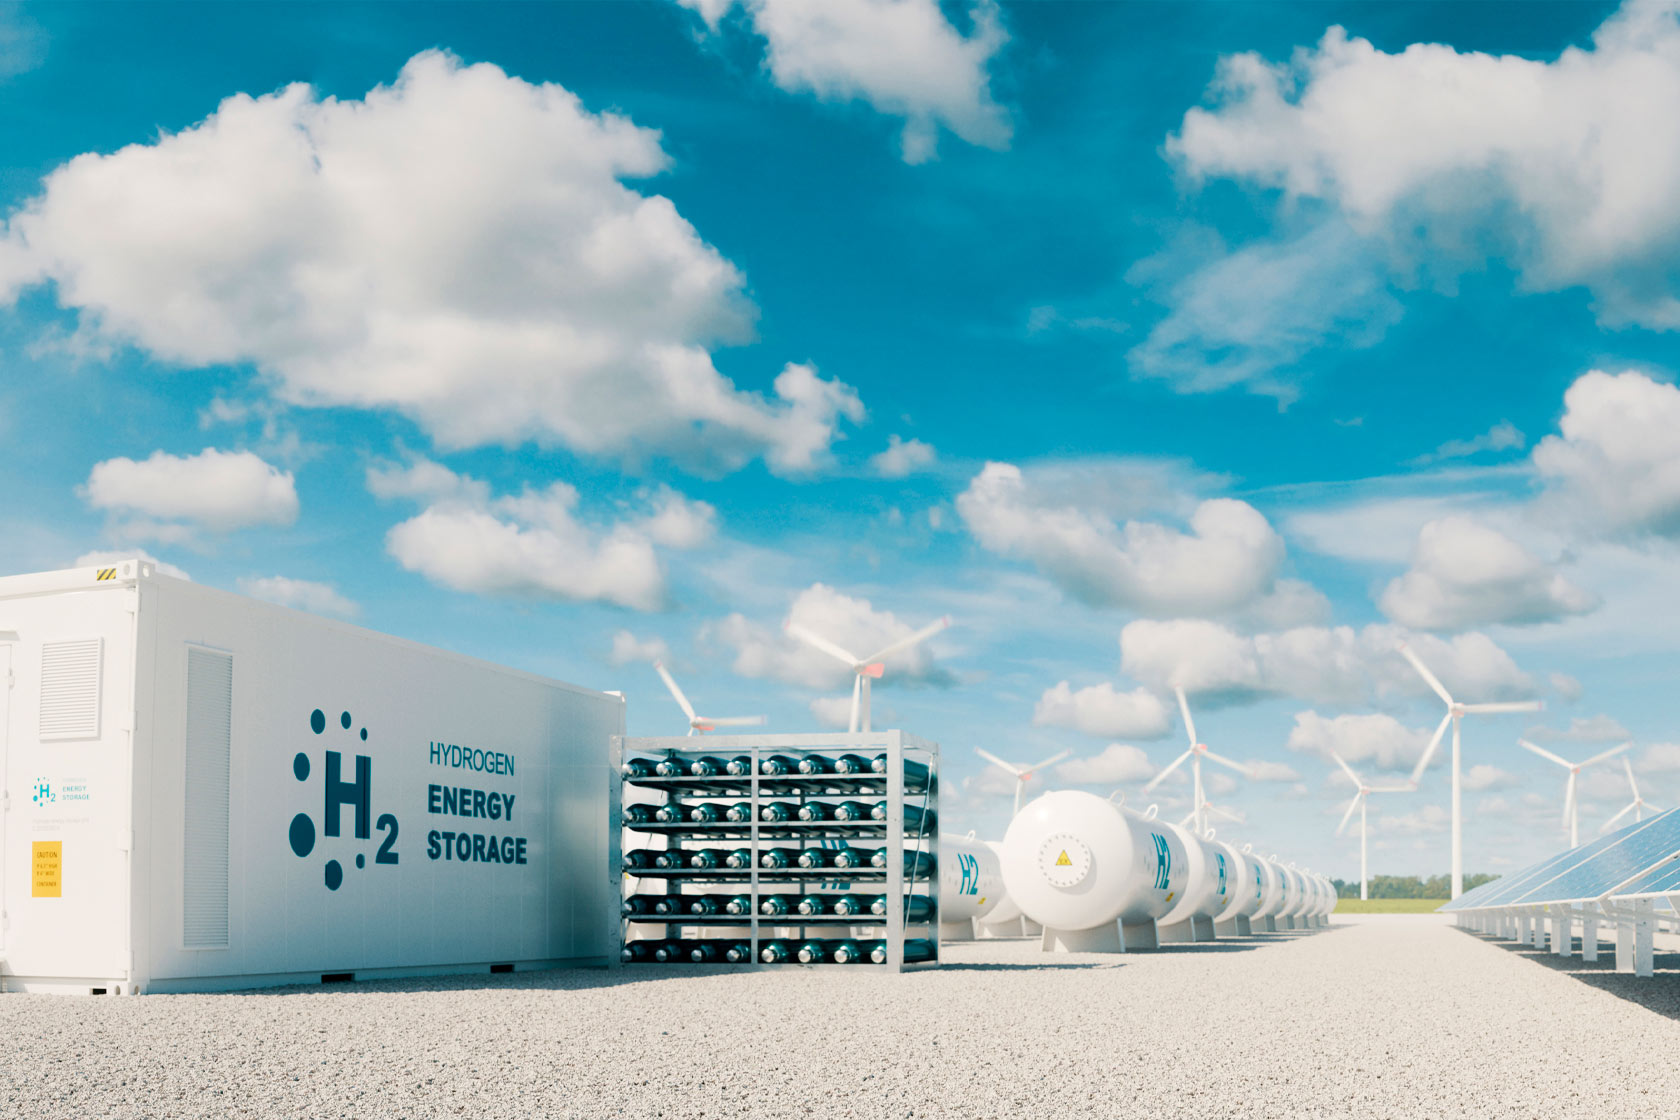 Hydrogen plant with tanks